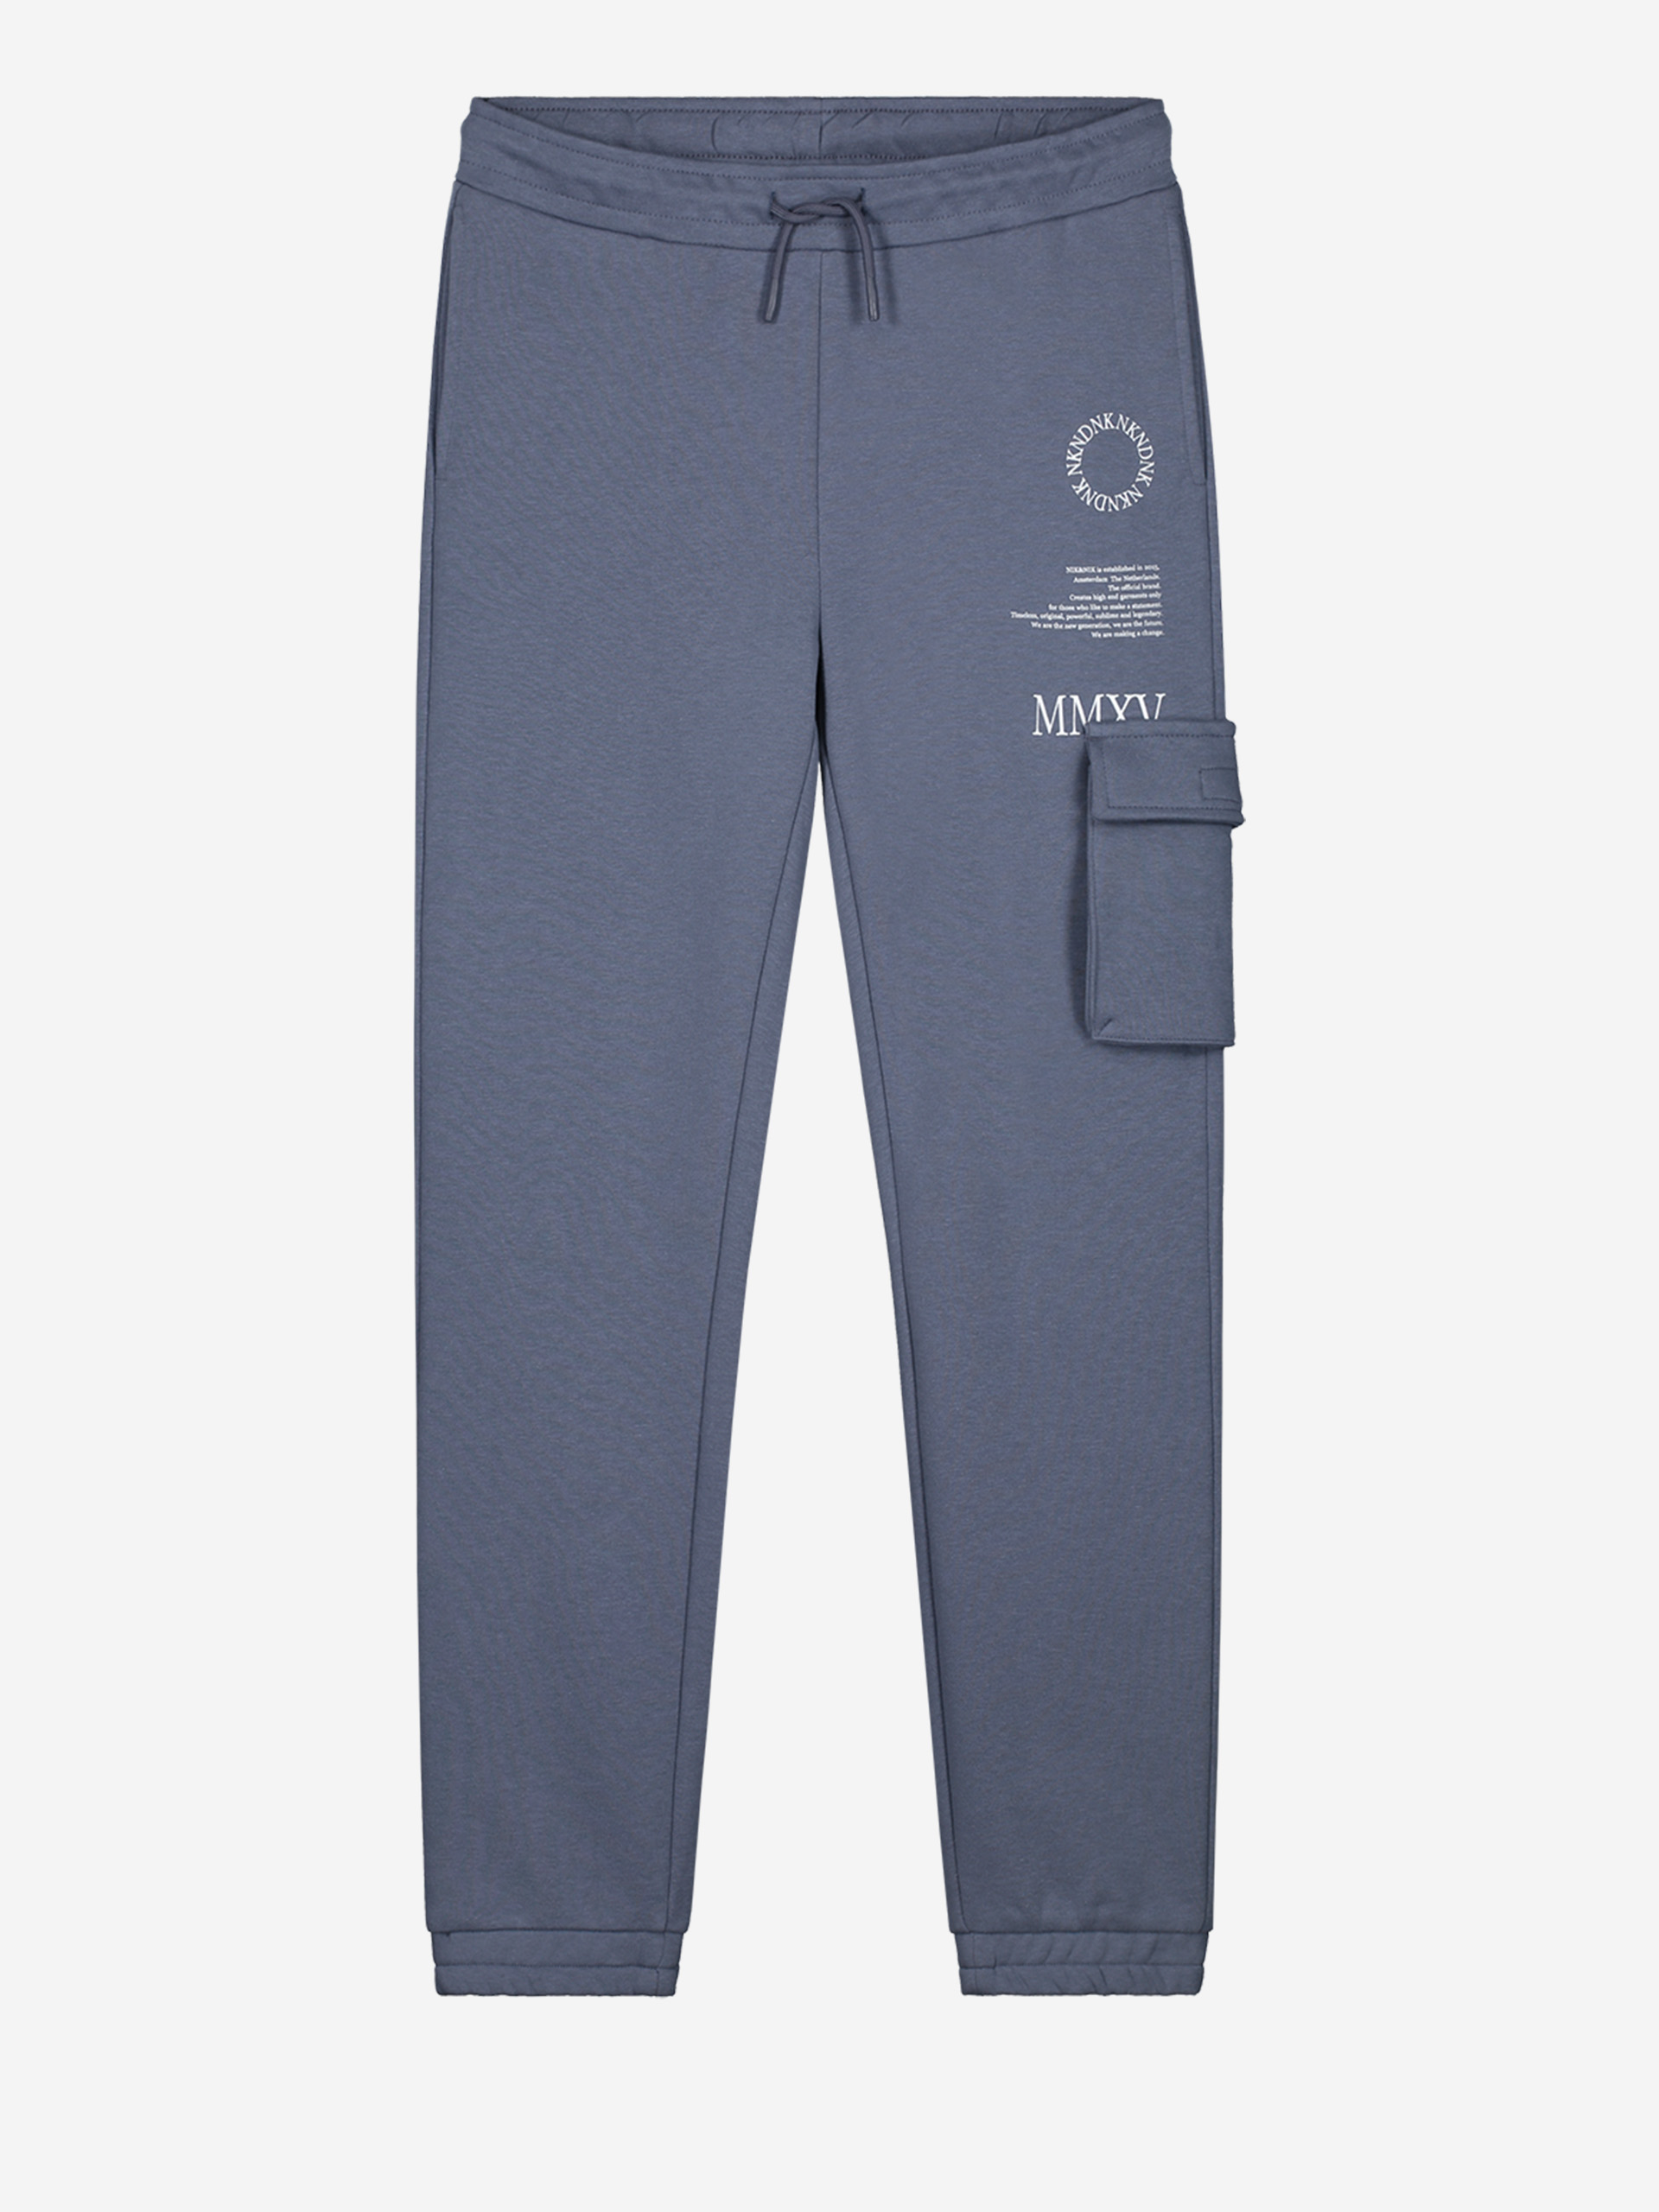 Mid rise Sweatpants with pocket